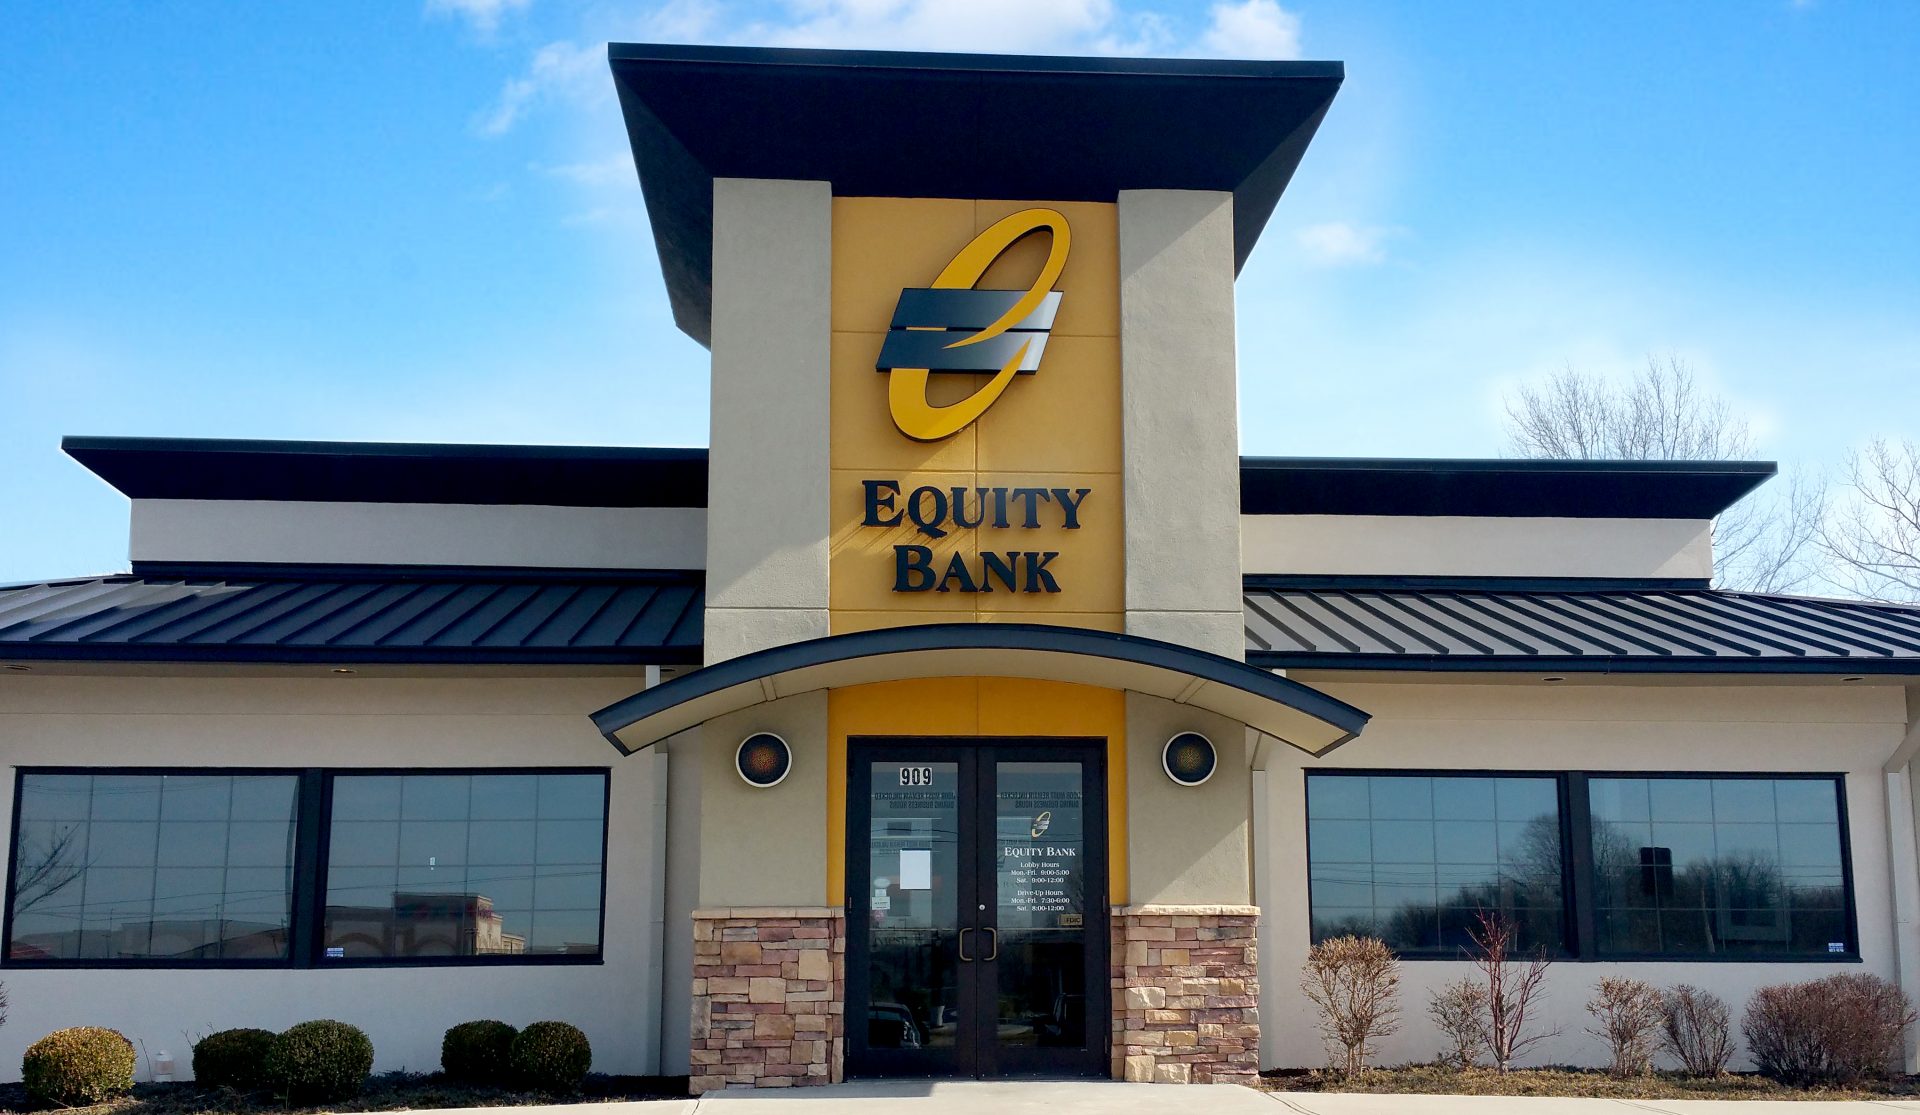 Equity Bank Lee's Summit North branch exterior.